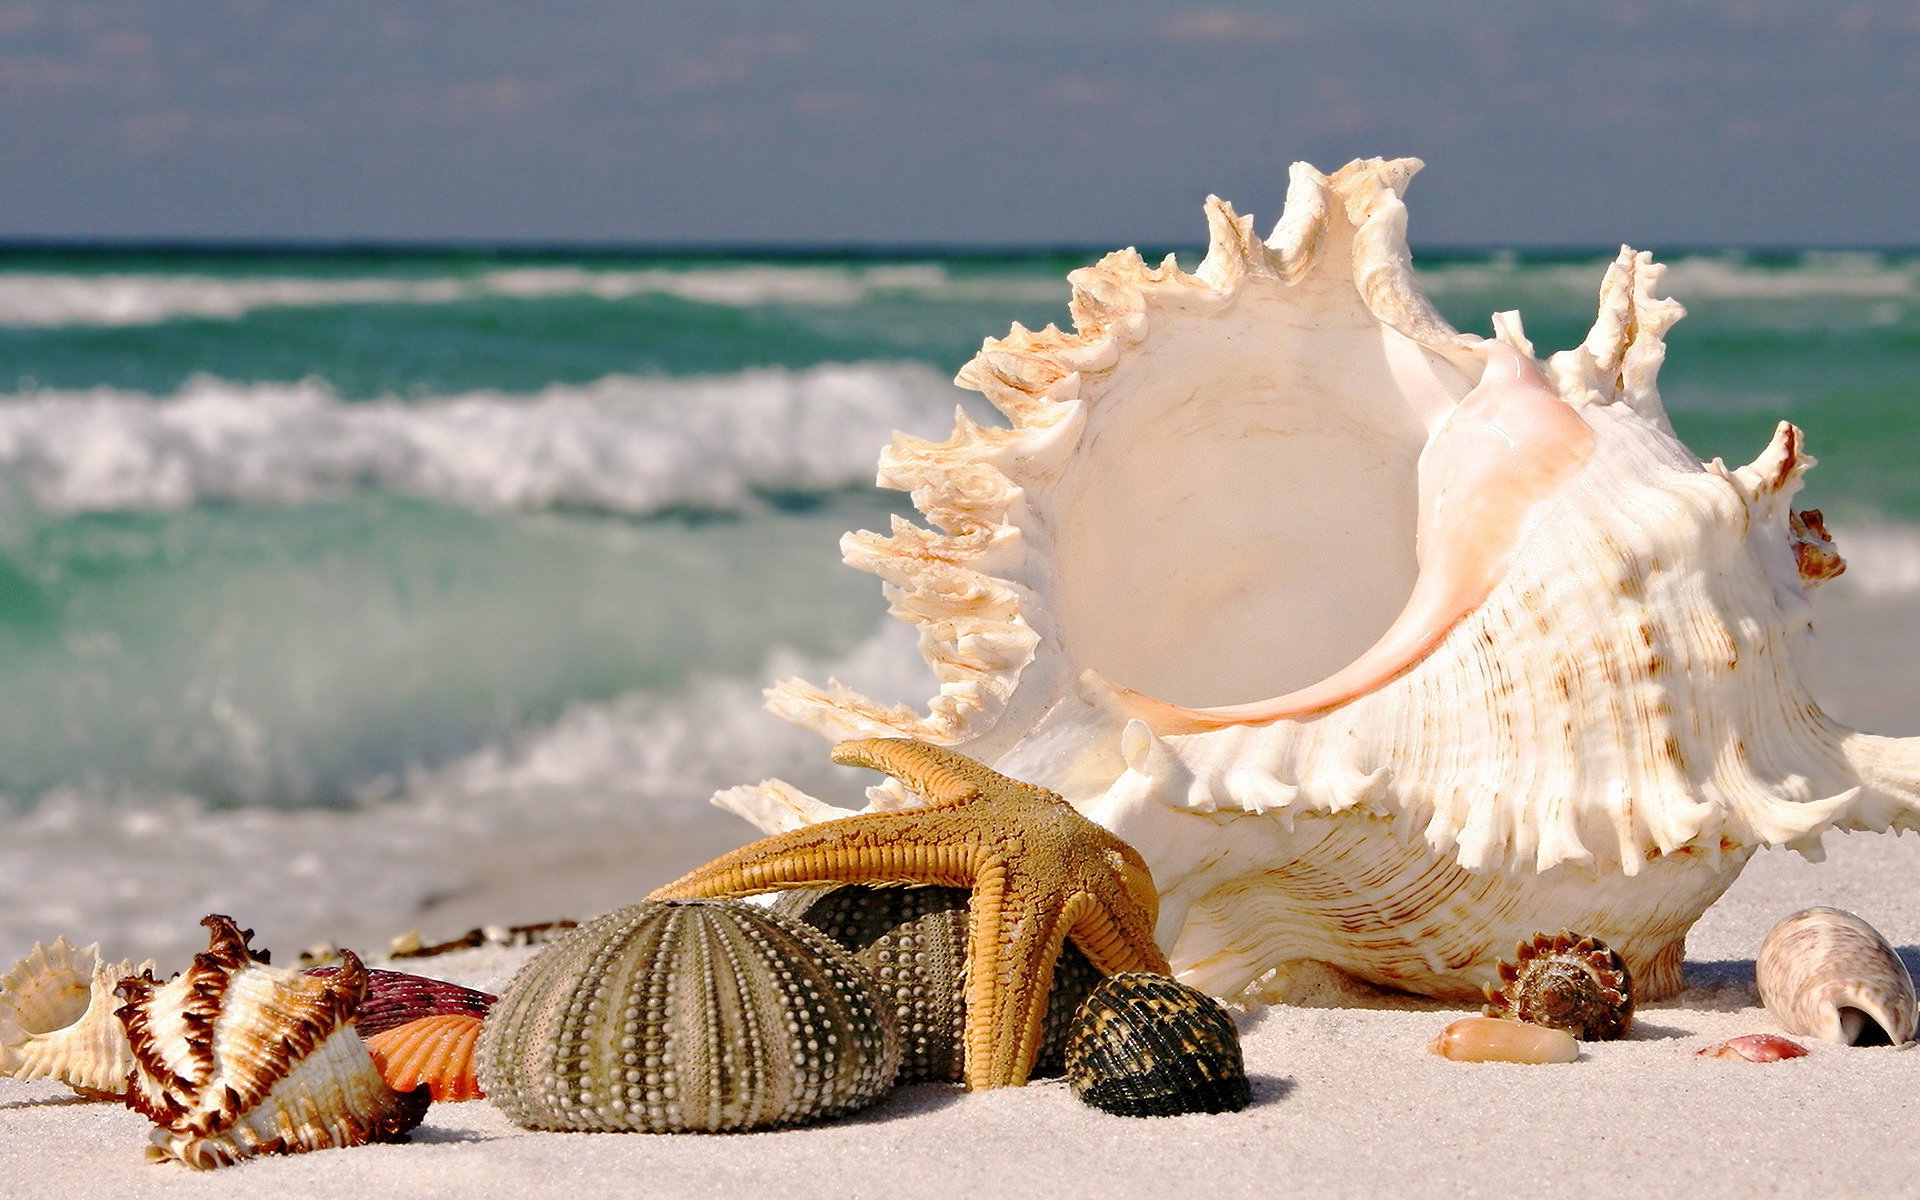 Everyone Knows Seashells Make The Sound Of The Ocean. But Do You Know Why? Hereâ€™s The Answer